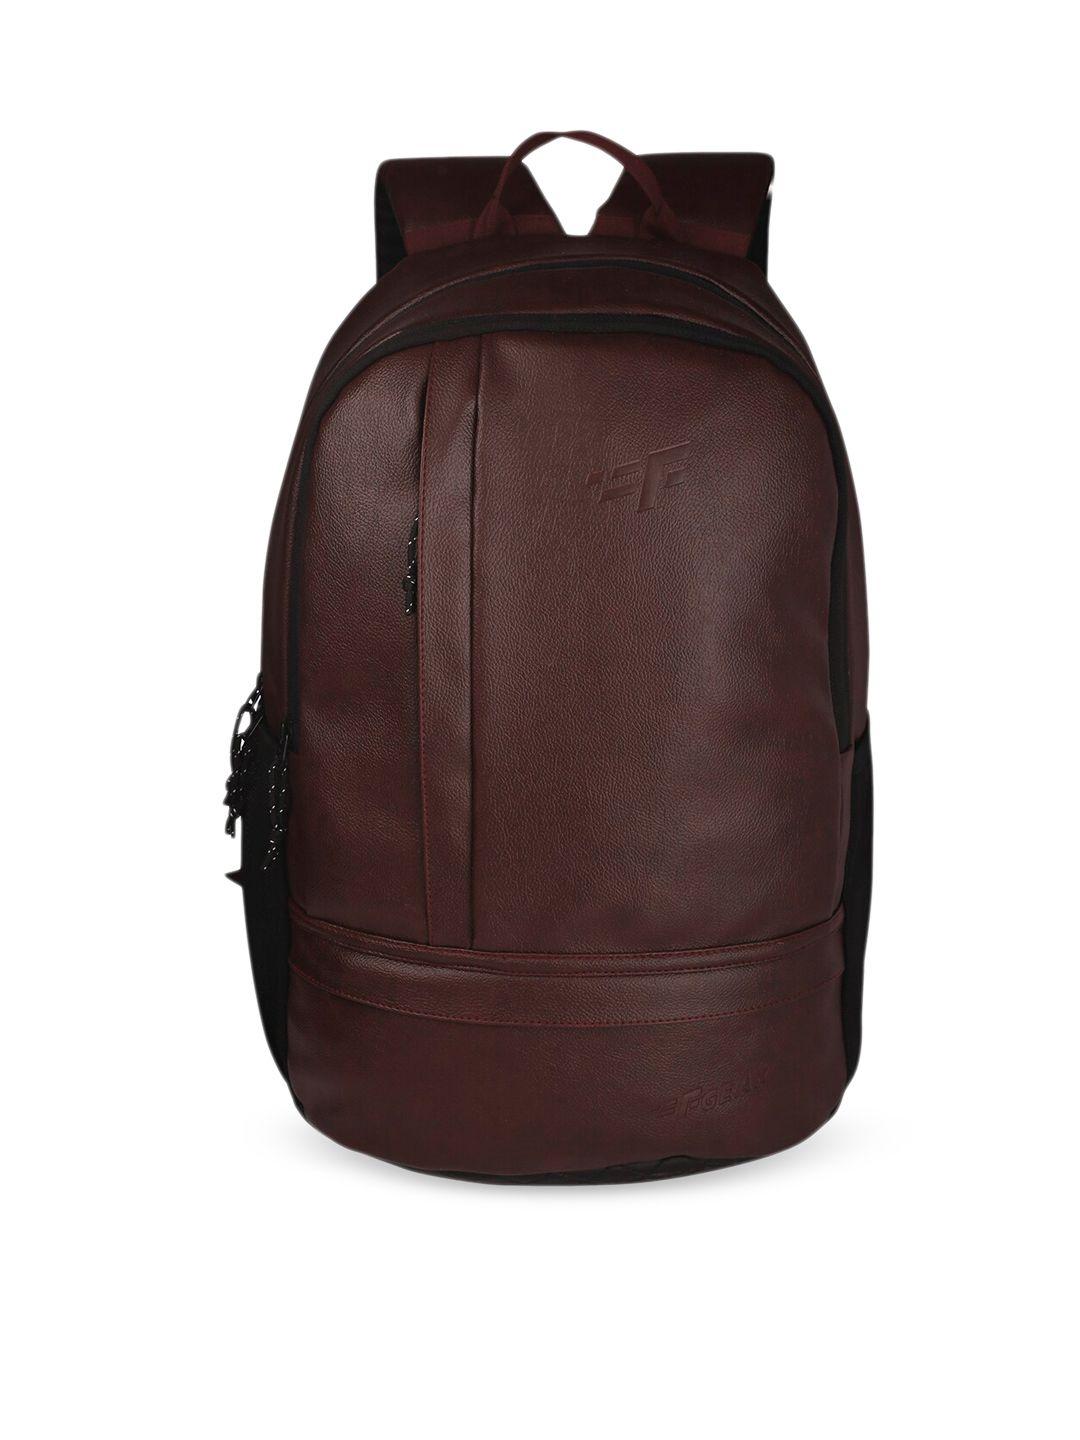 f gear unisex brown textured backpack